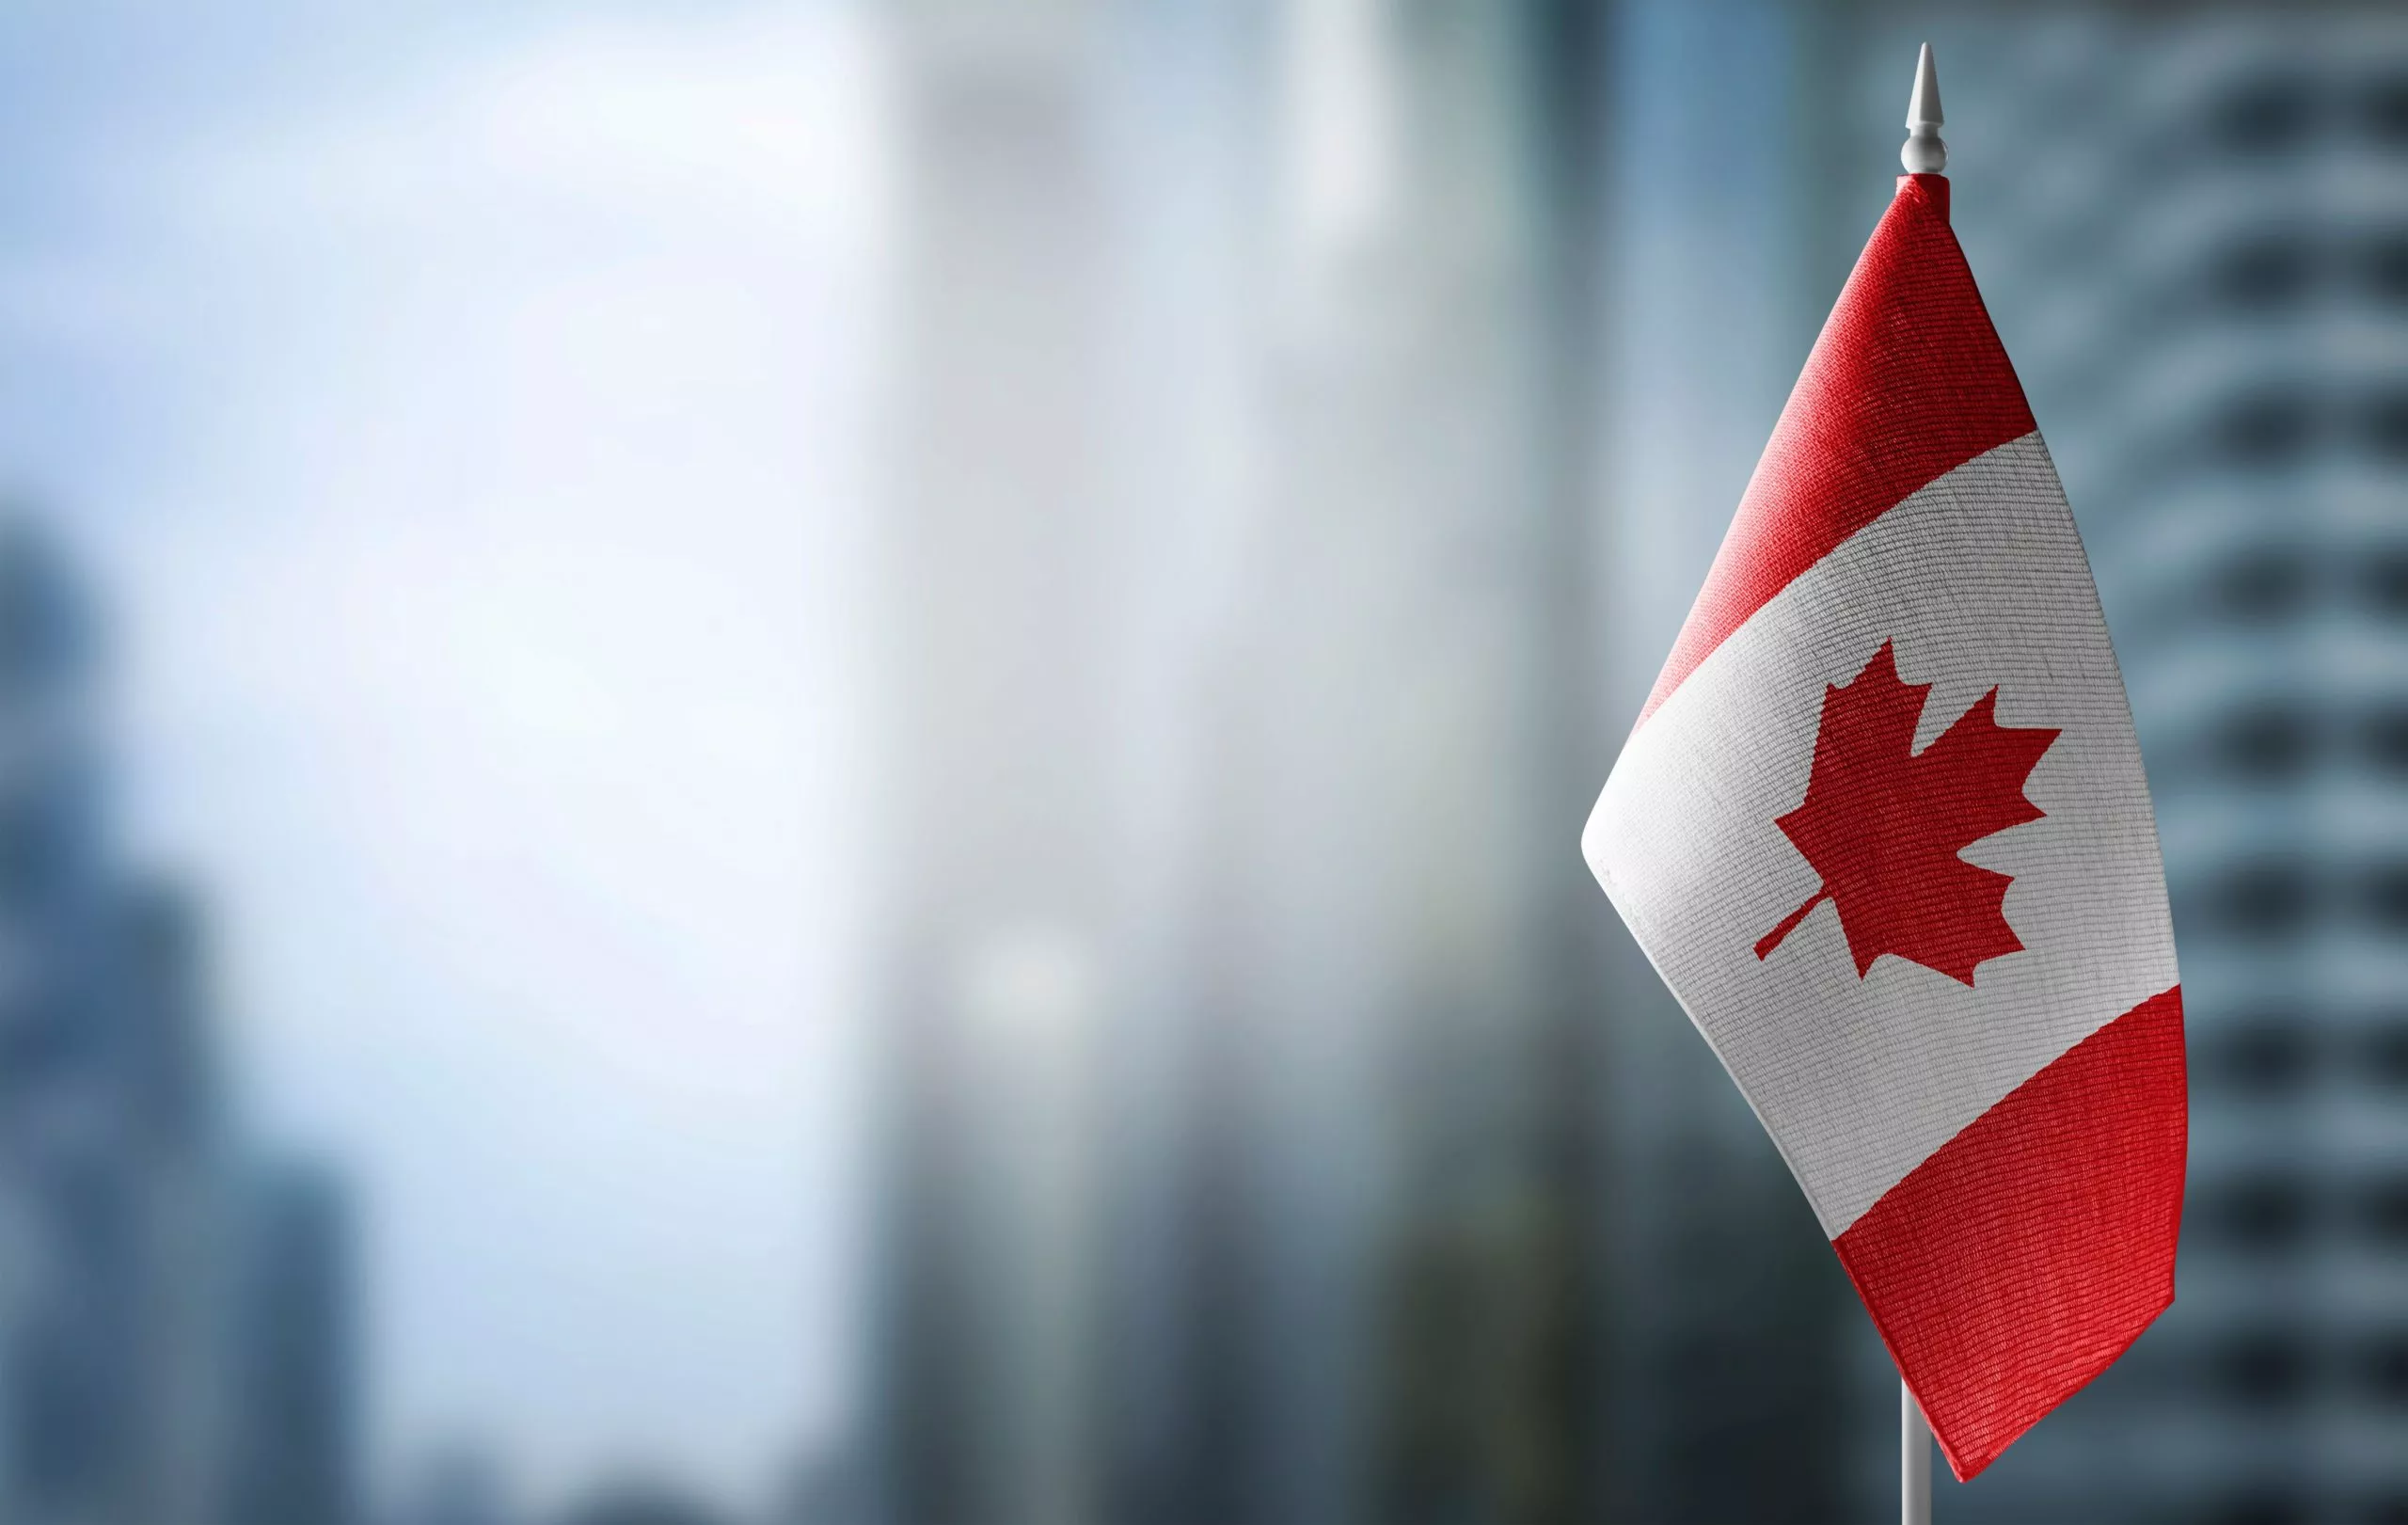 Canadian flag with skyscraper buildings in the background to symbolize